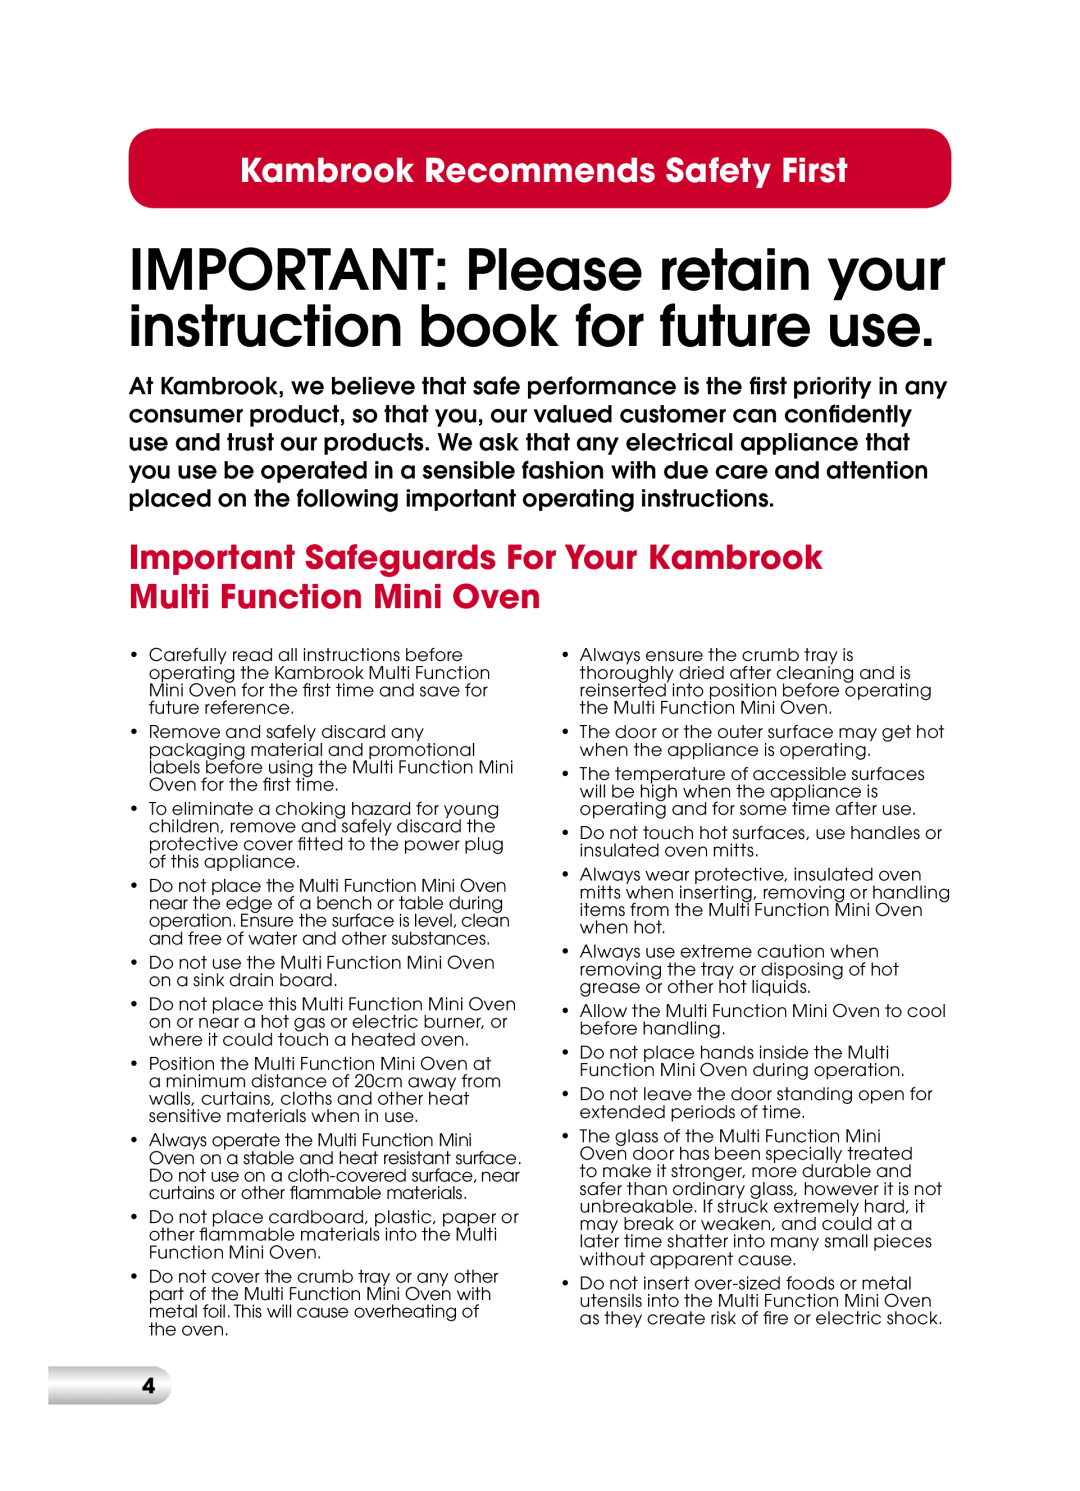 Kambrook KOT710 manual Important Safeguards For Your Kambrook Multi Function Mini Oven, Kambrook Recommends Safety First 